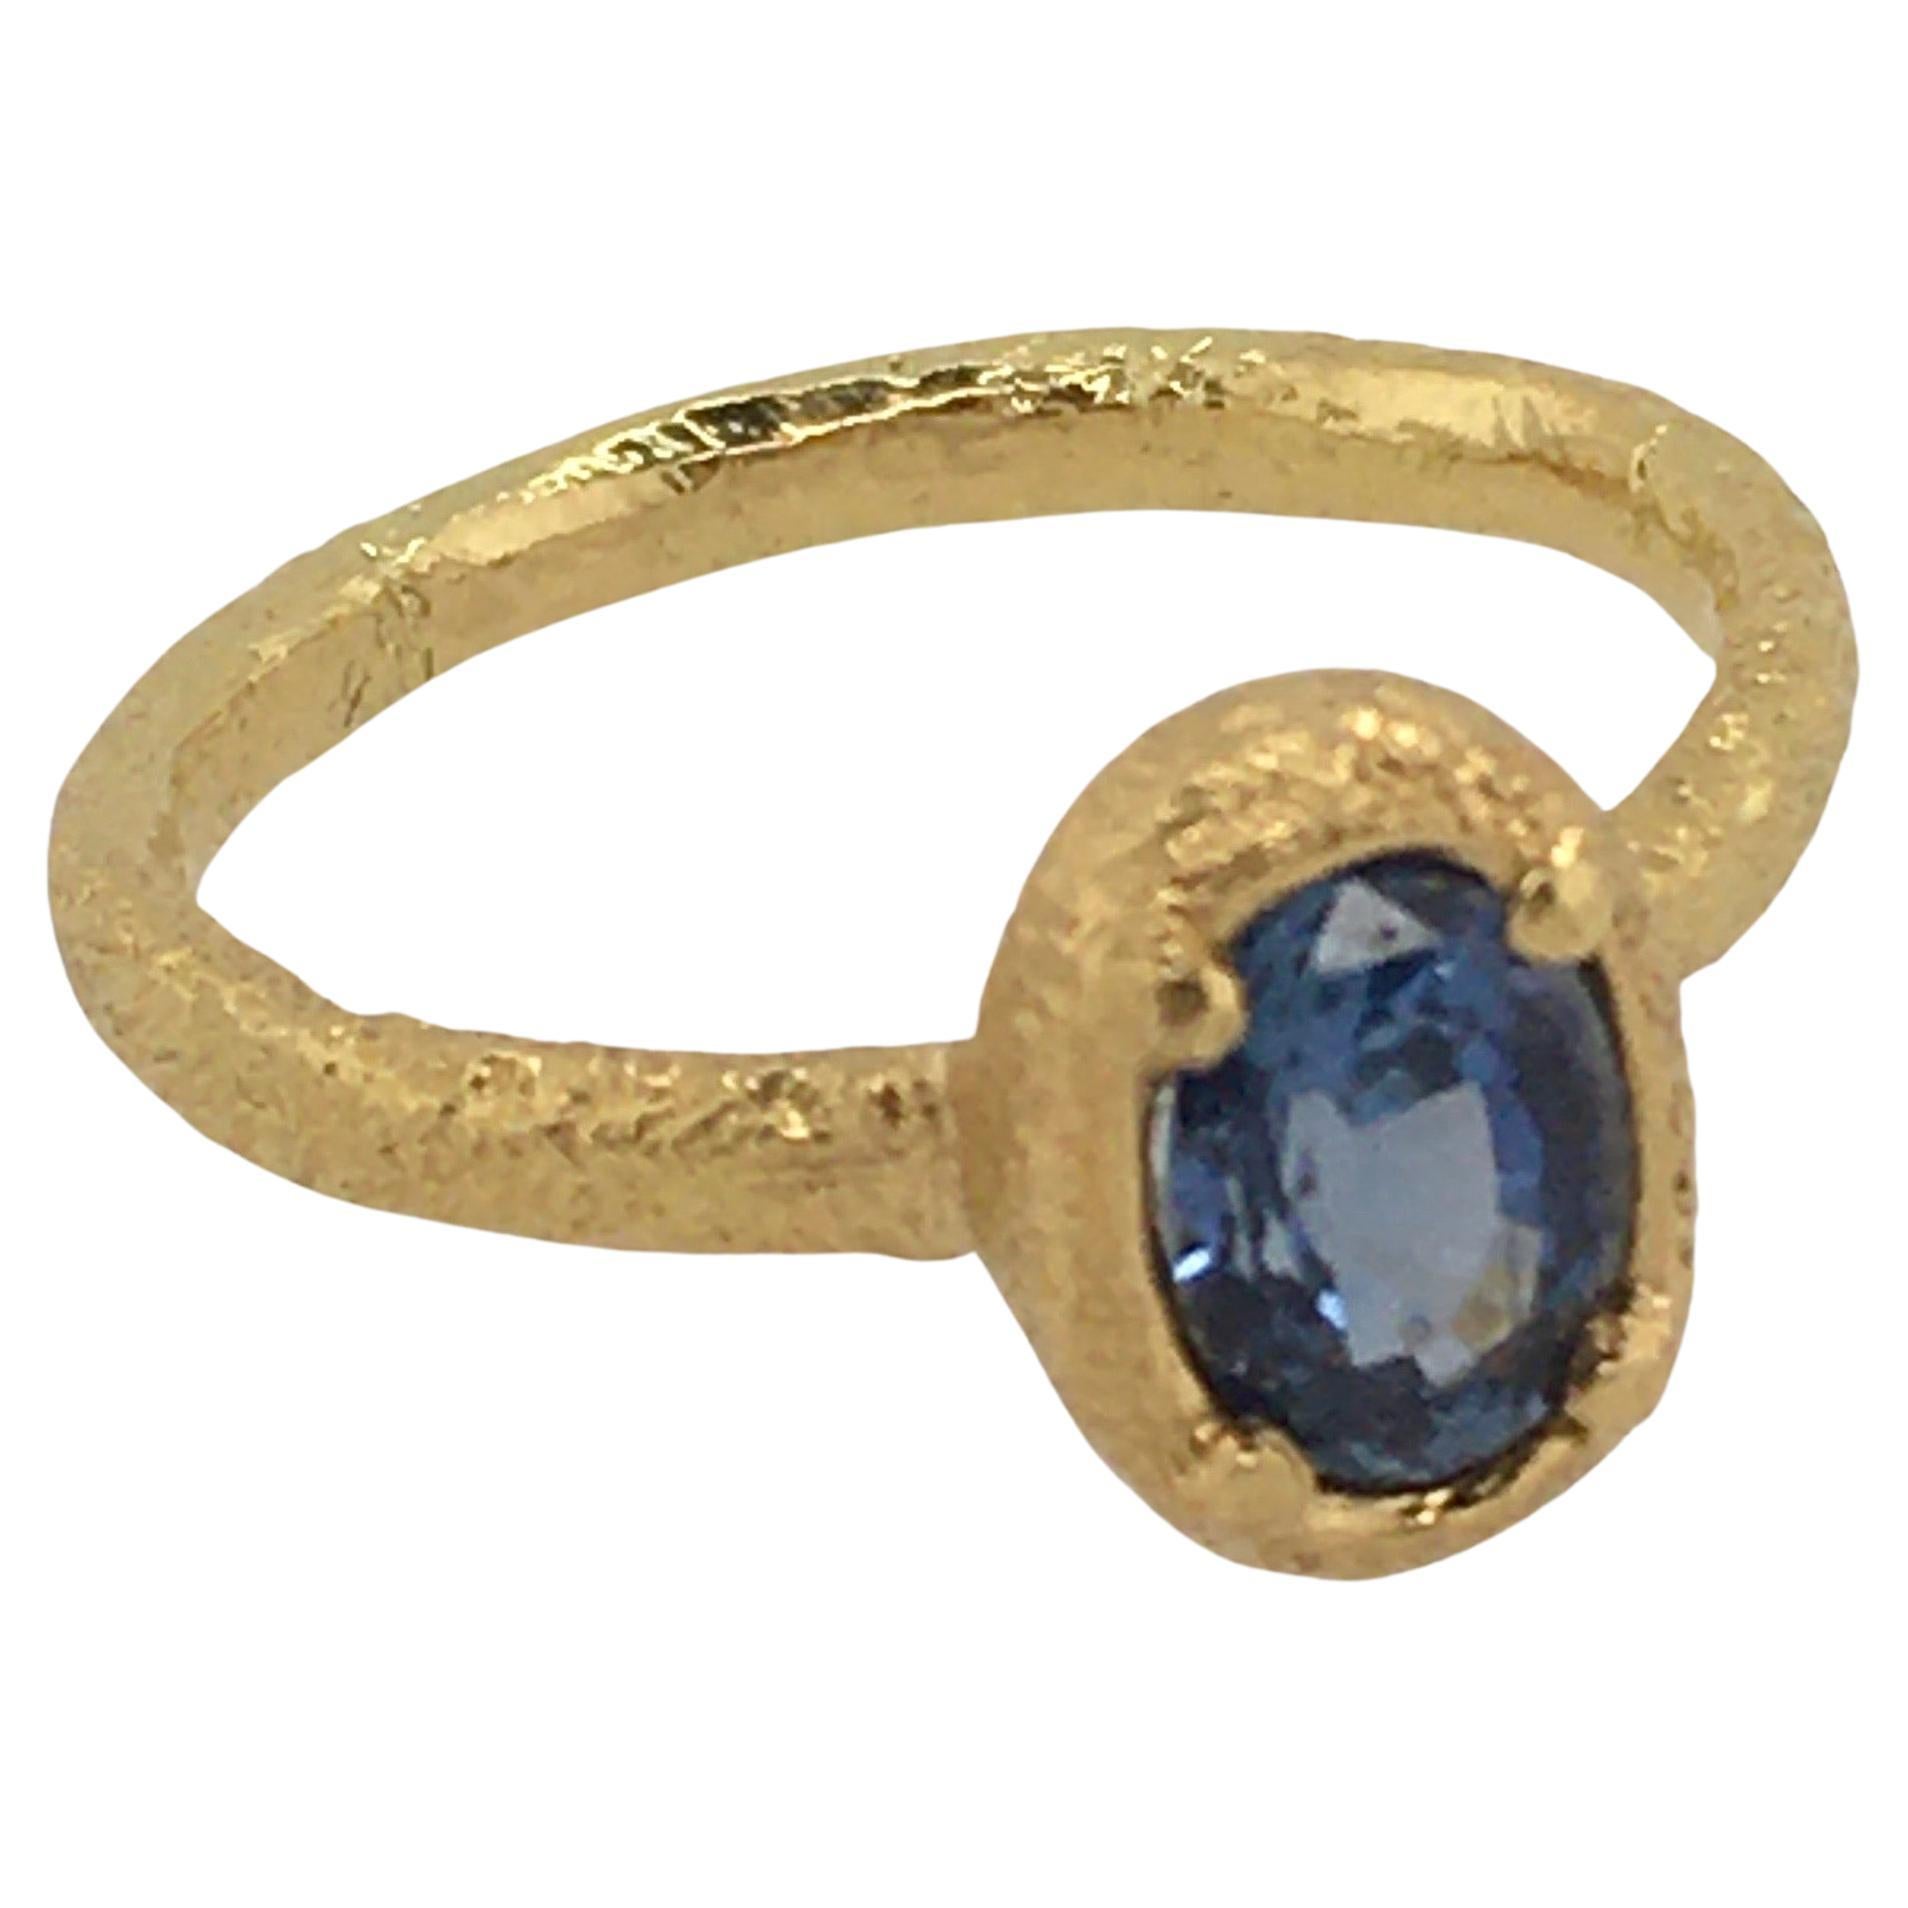 Stunning one-of-a-kind oval Ceylon Blue Sapphire set in hand-textured 18K Yellow Gold.  Sapphire measures 6.82mm x 5mm x 3.46mm.  The band width is 2.5mm.   Created by well-known Portland, Maine jeweler Patricia Daunis.   

Part of her custom 18K